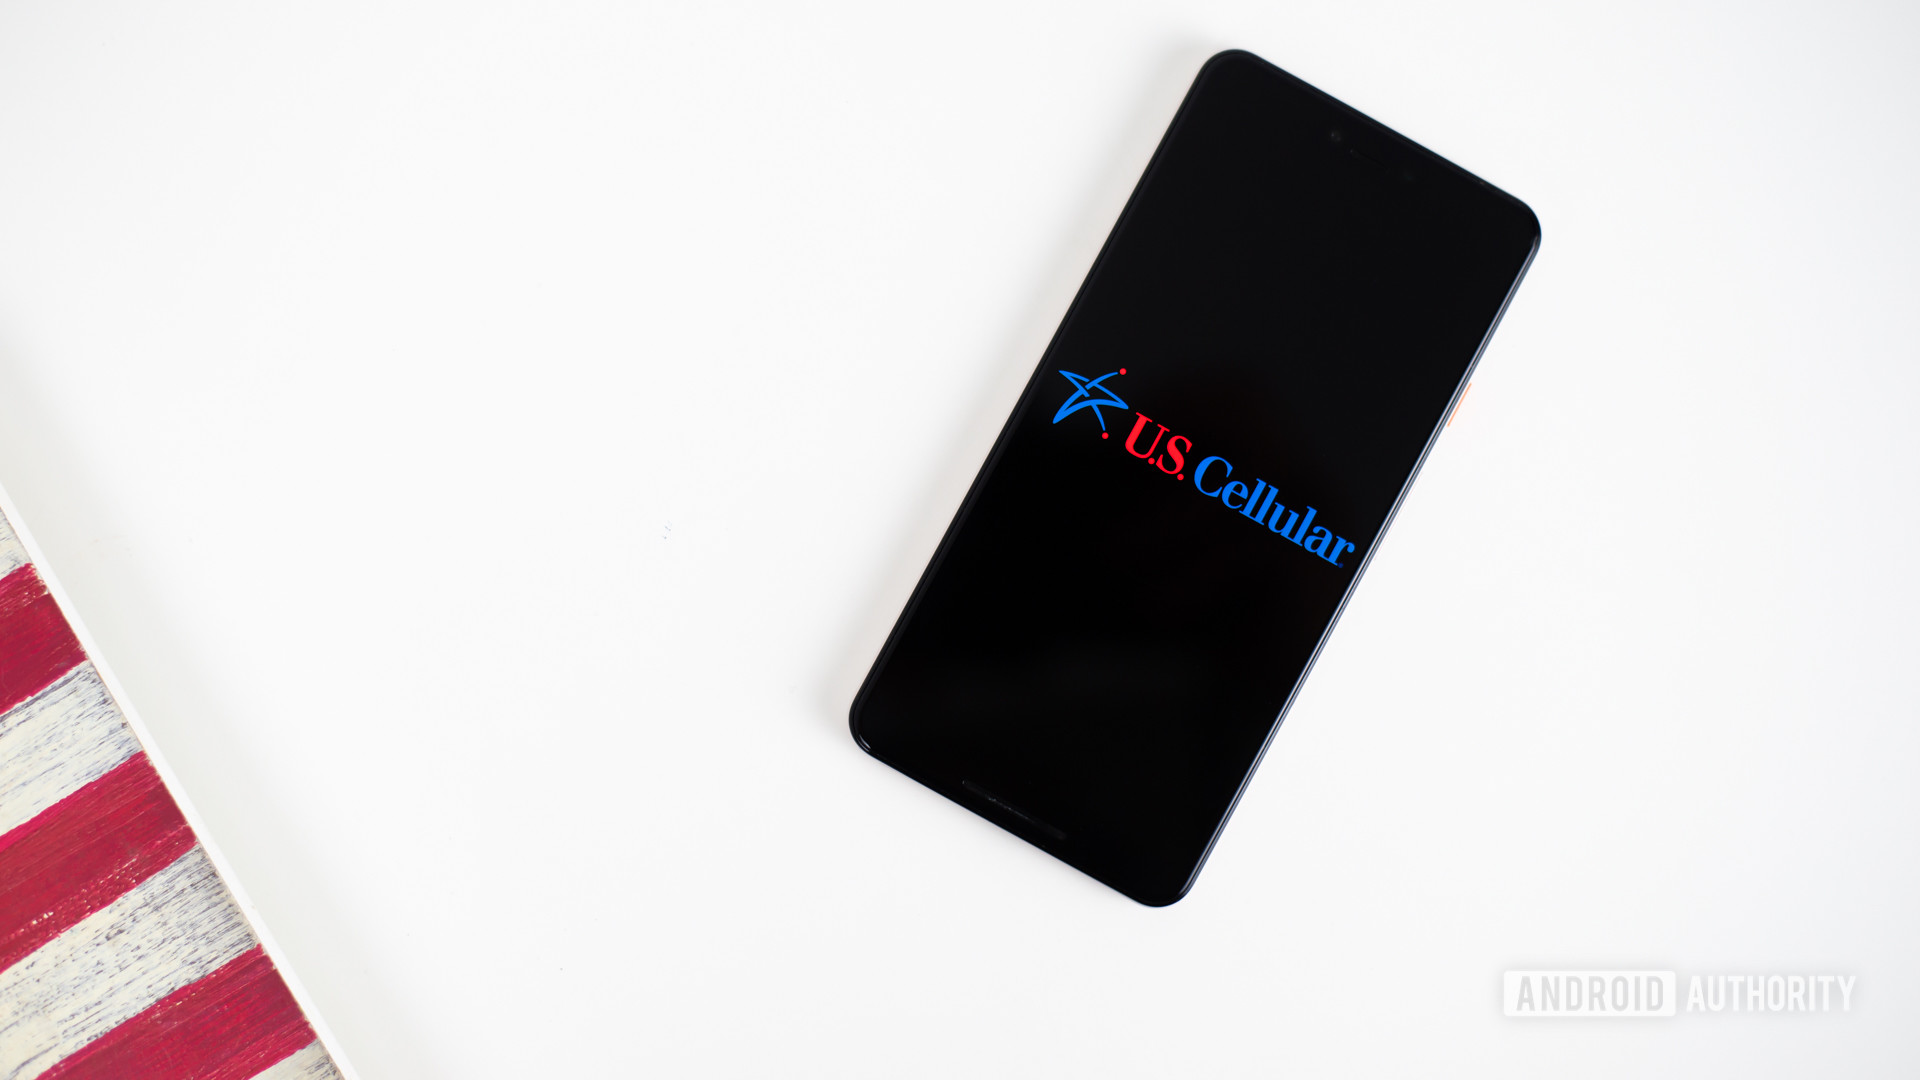 US Cellular MVNO carrier stock photo 1